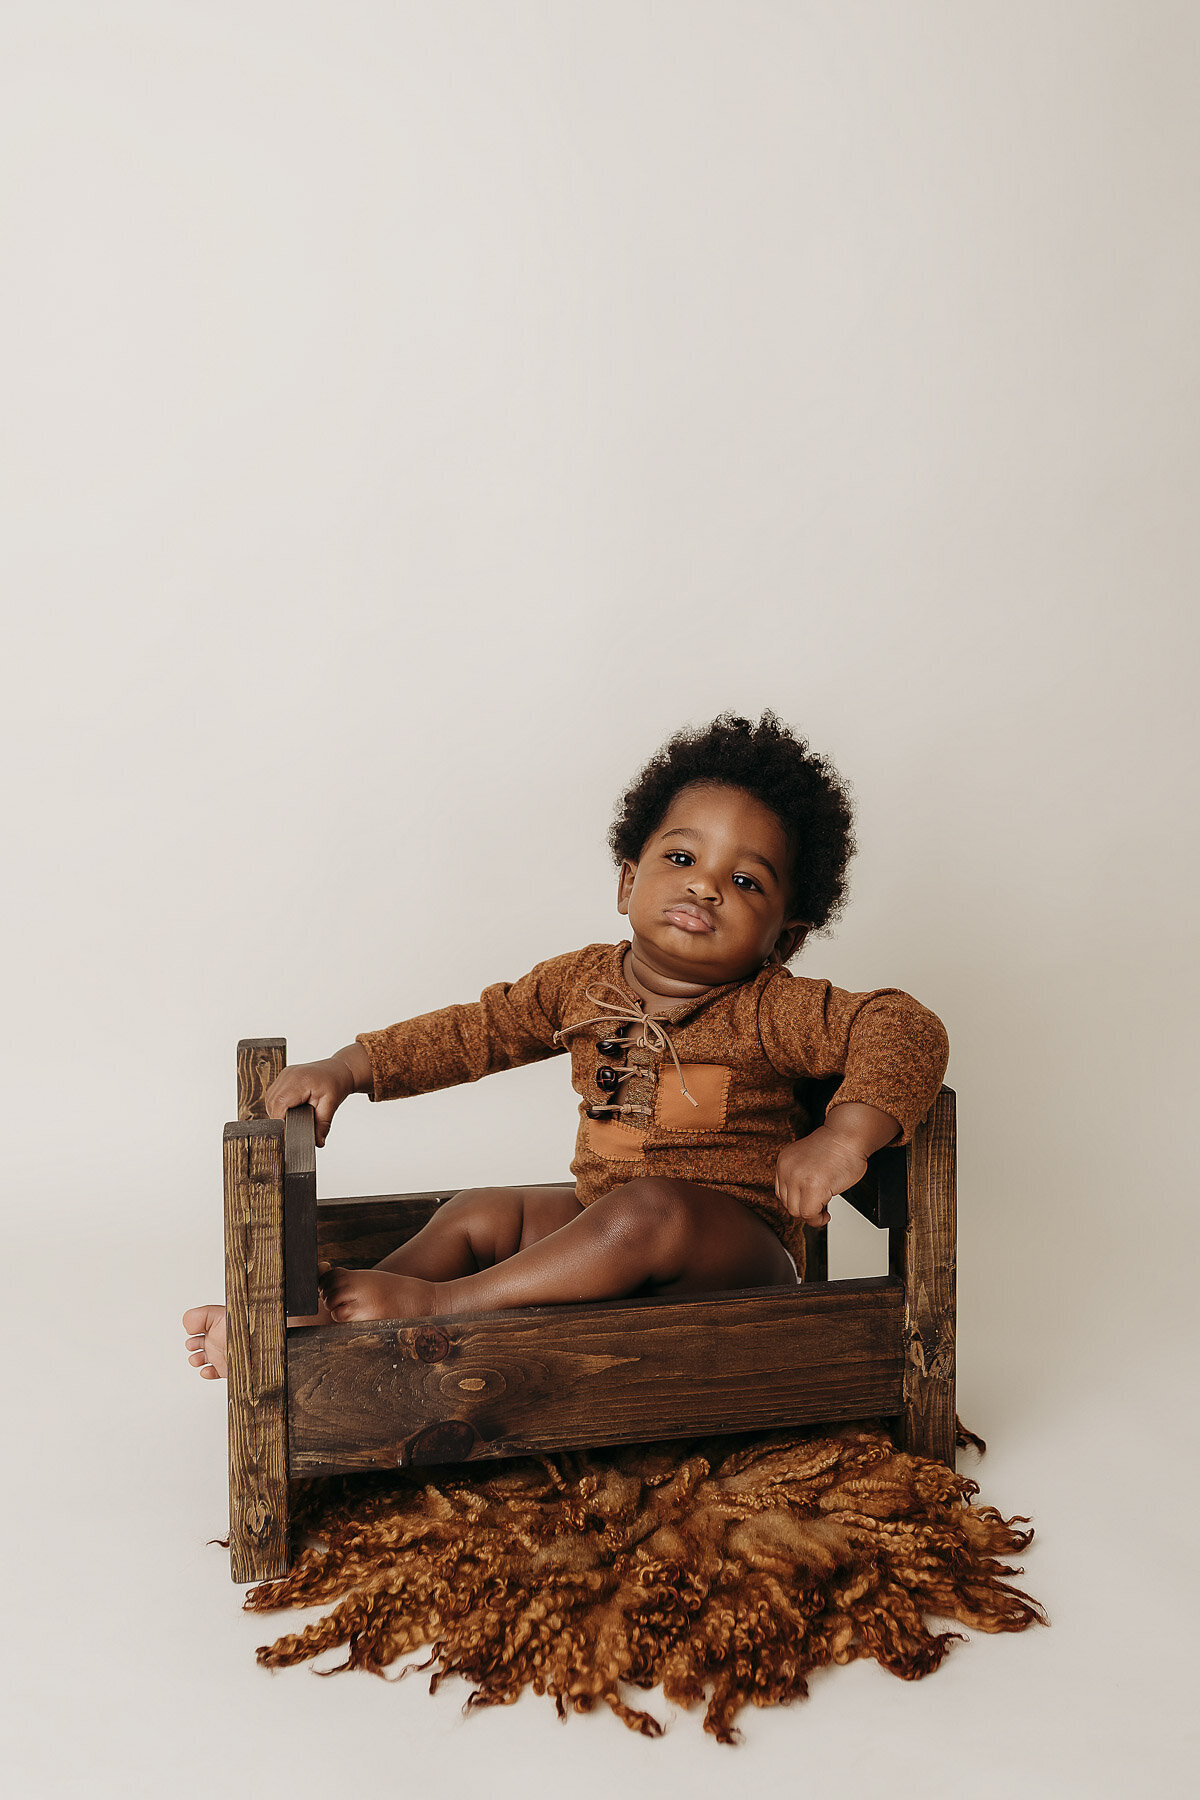 baby sitting in a wooden crib